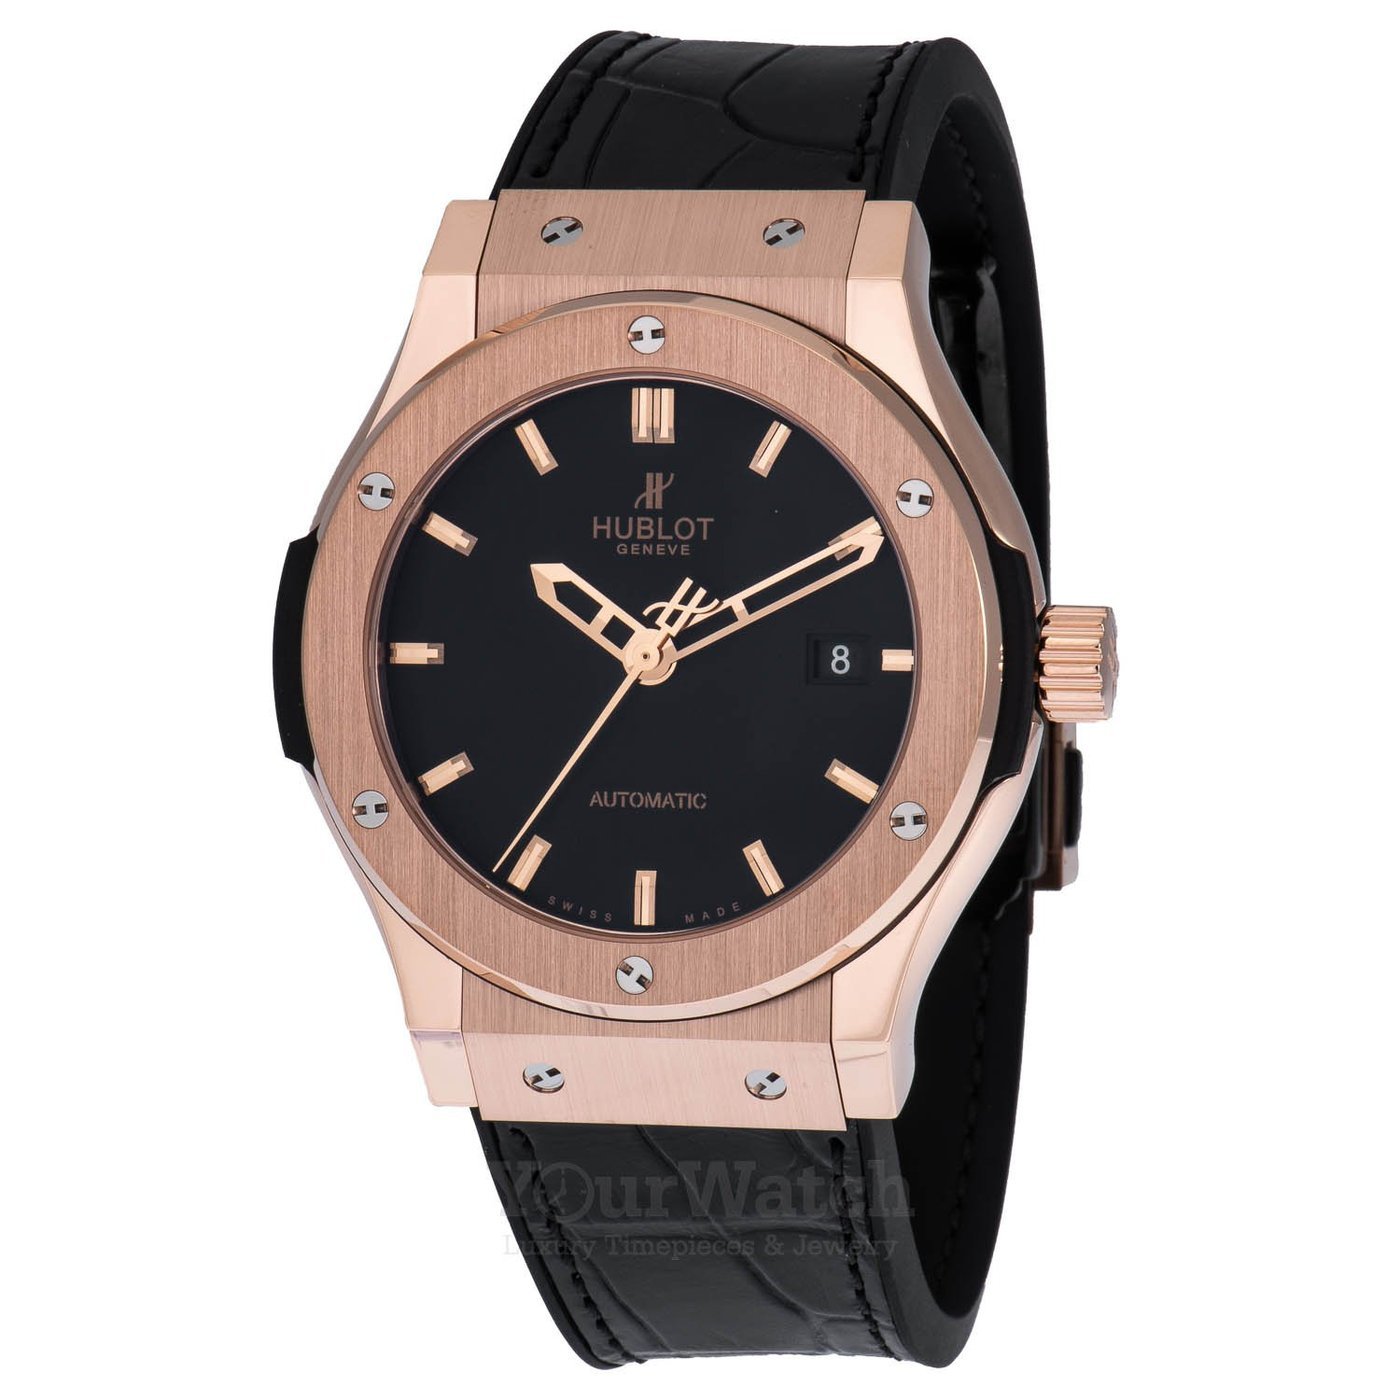 Hublot-Classic-Fusion-Automatic-42mm-Mens-Watch-542OX1180LR-Yourwatch